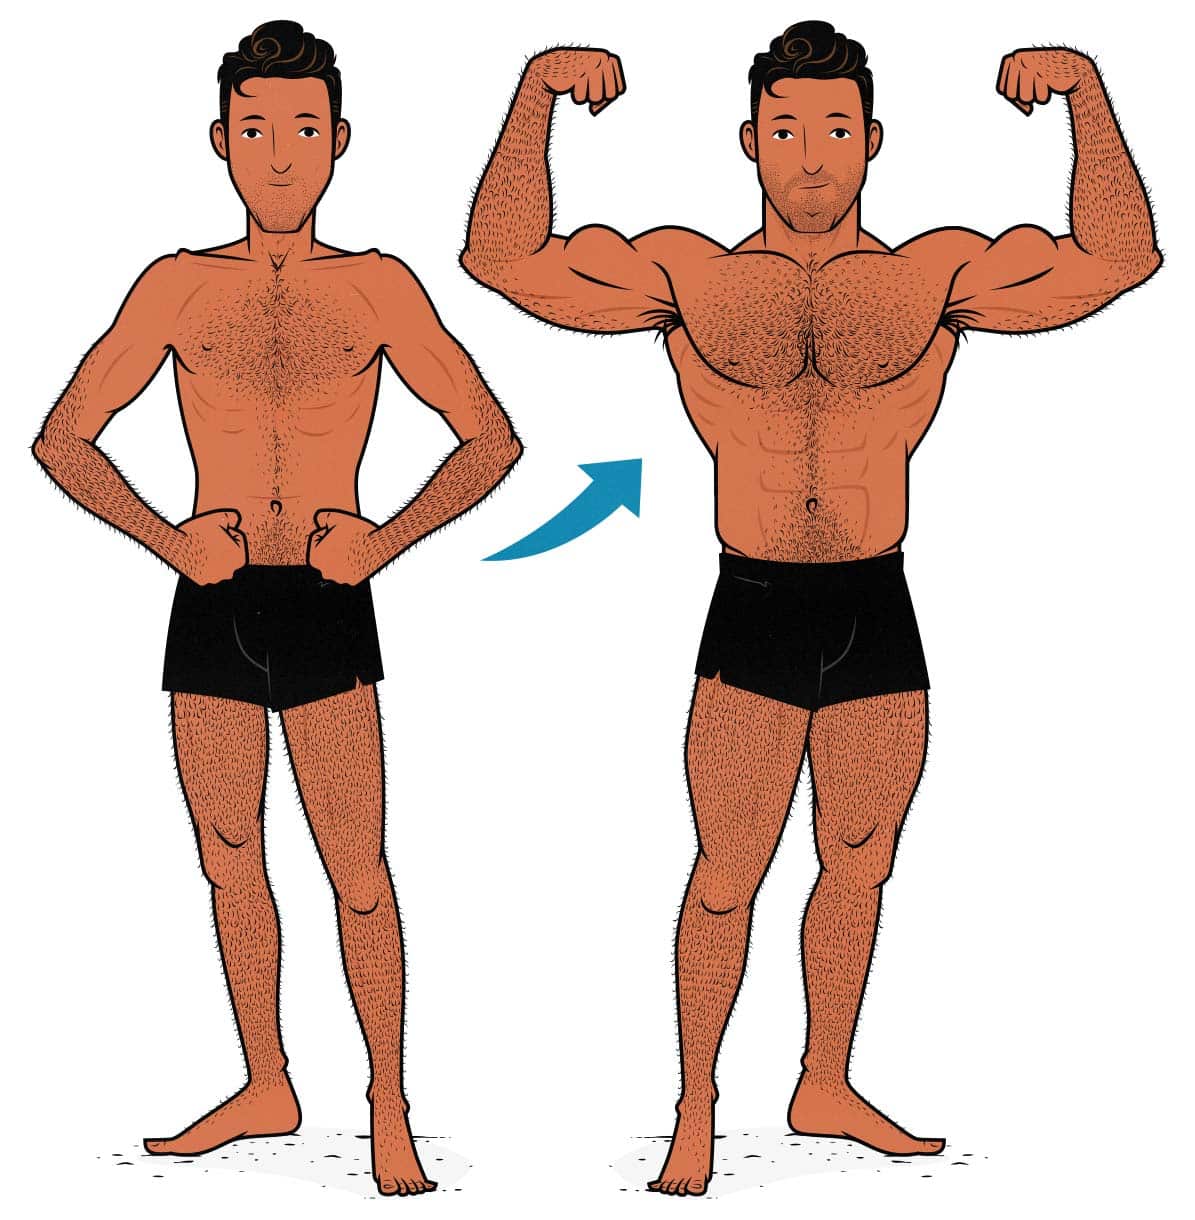 Bony to Beastly illustration showing a skinny guy bulking up and becoming muscular.